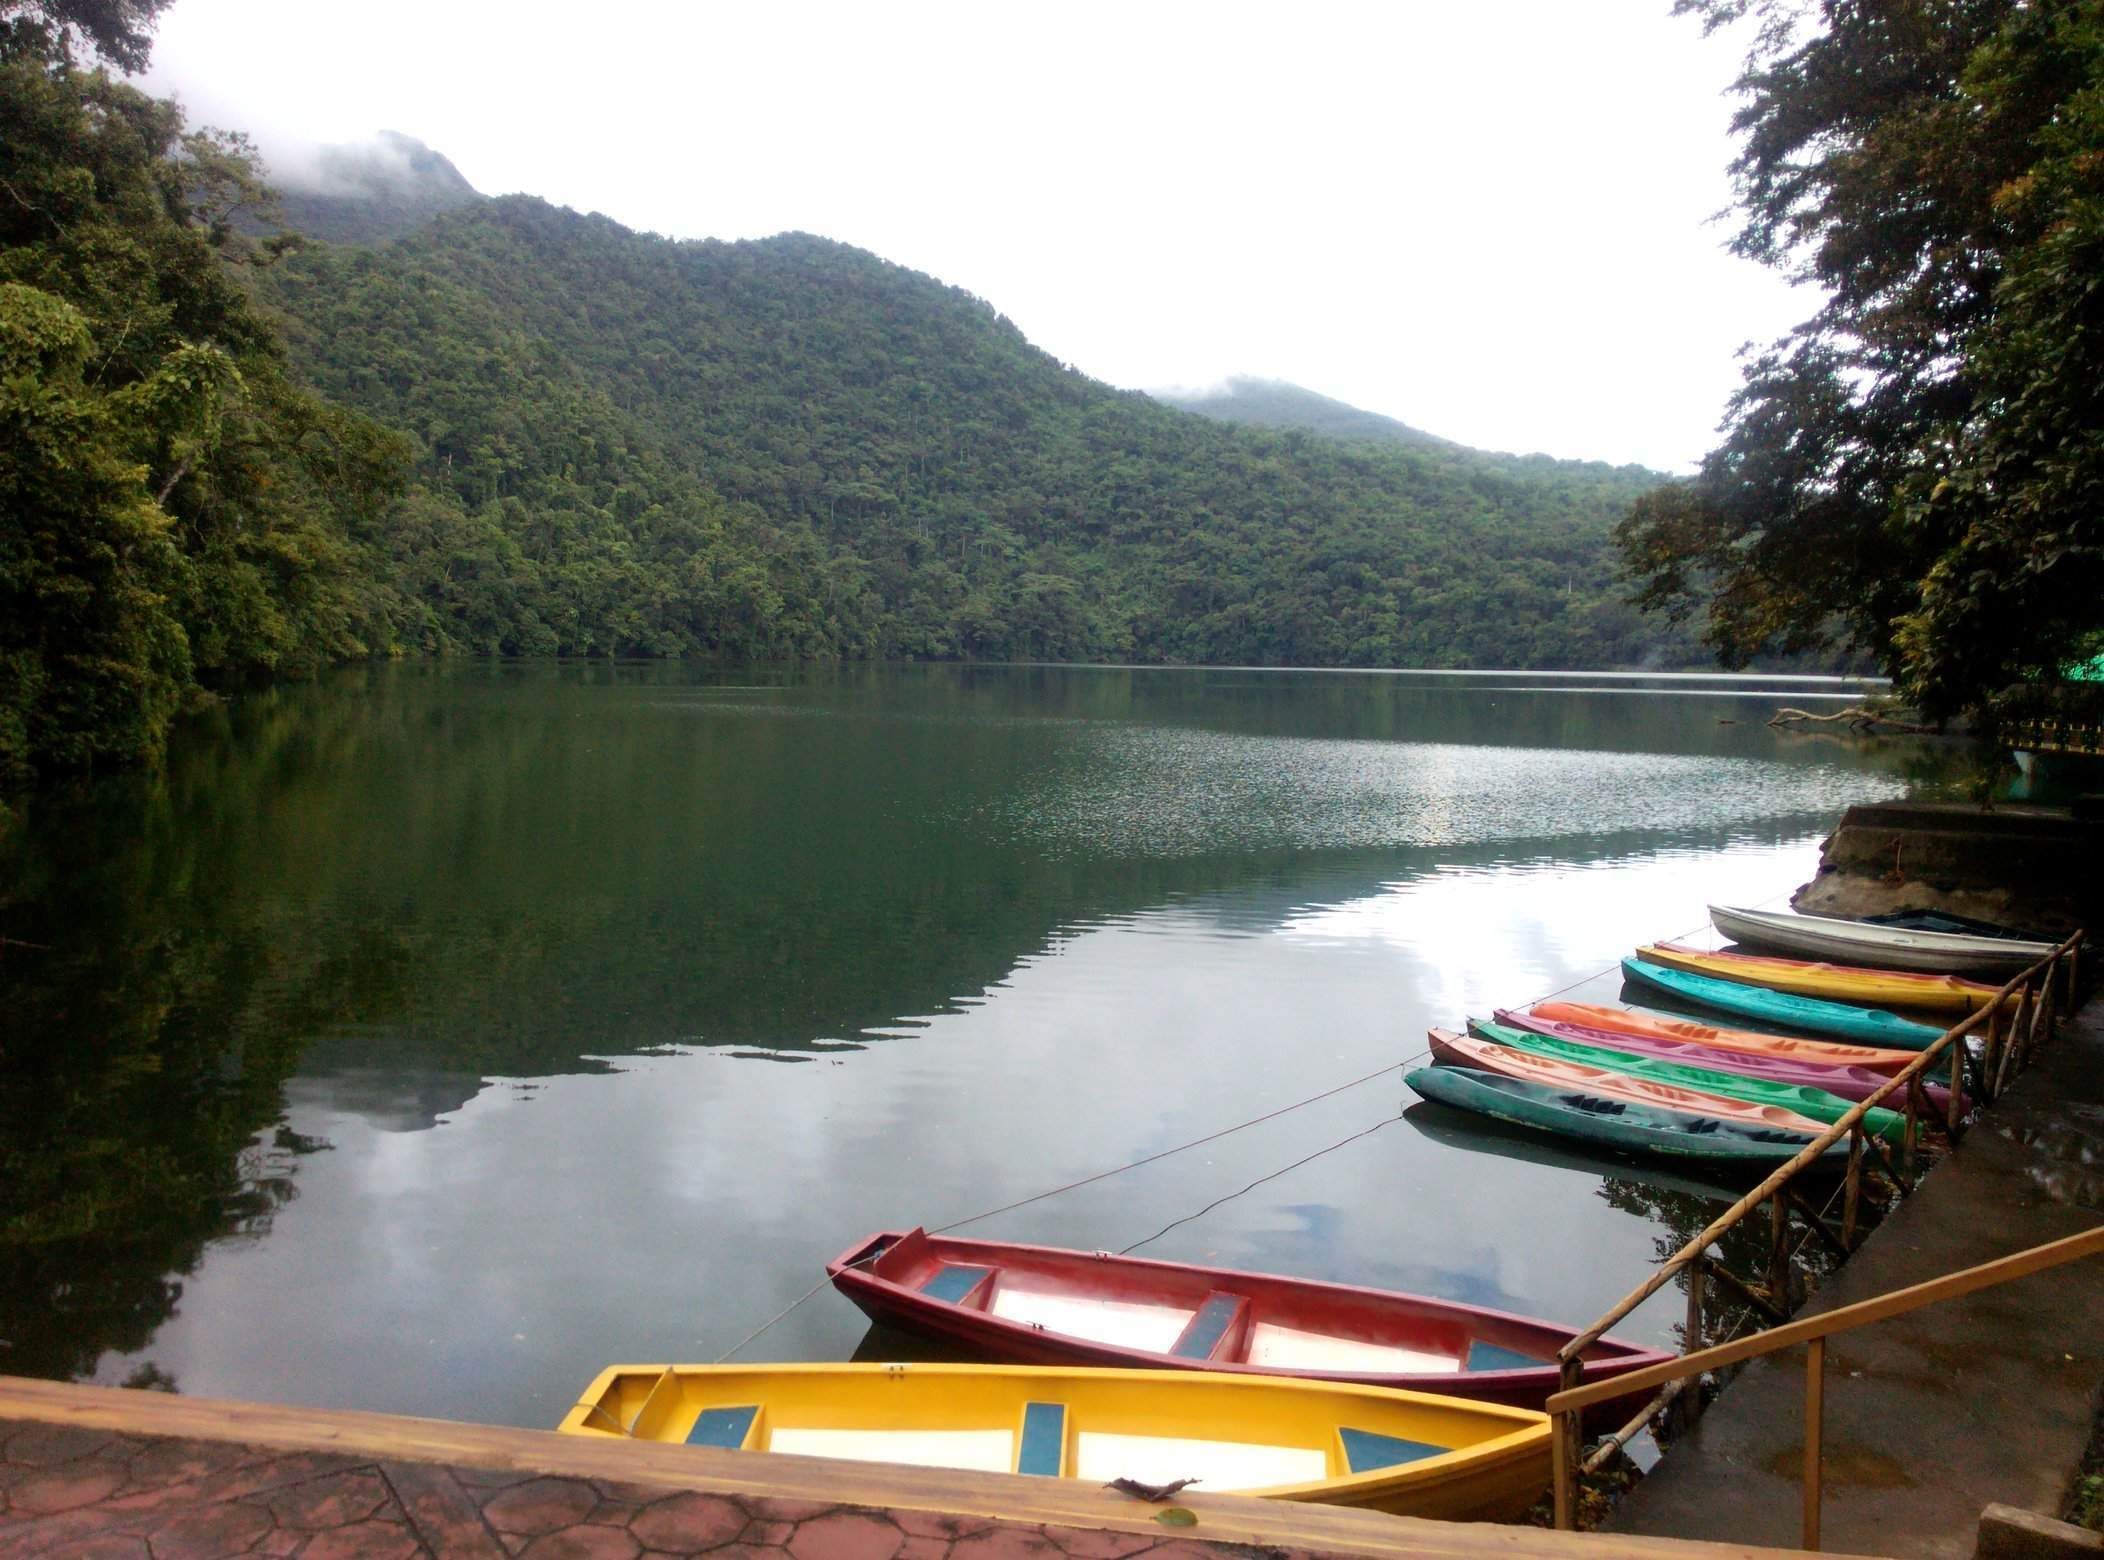 How residents make a living out of their home, Lake Bulusan